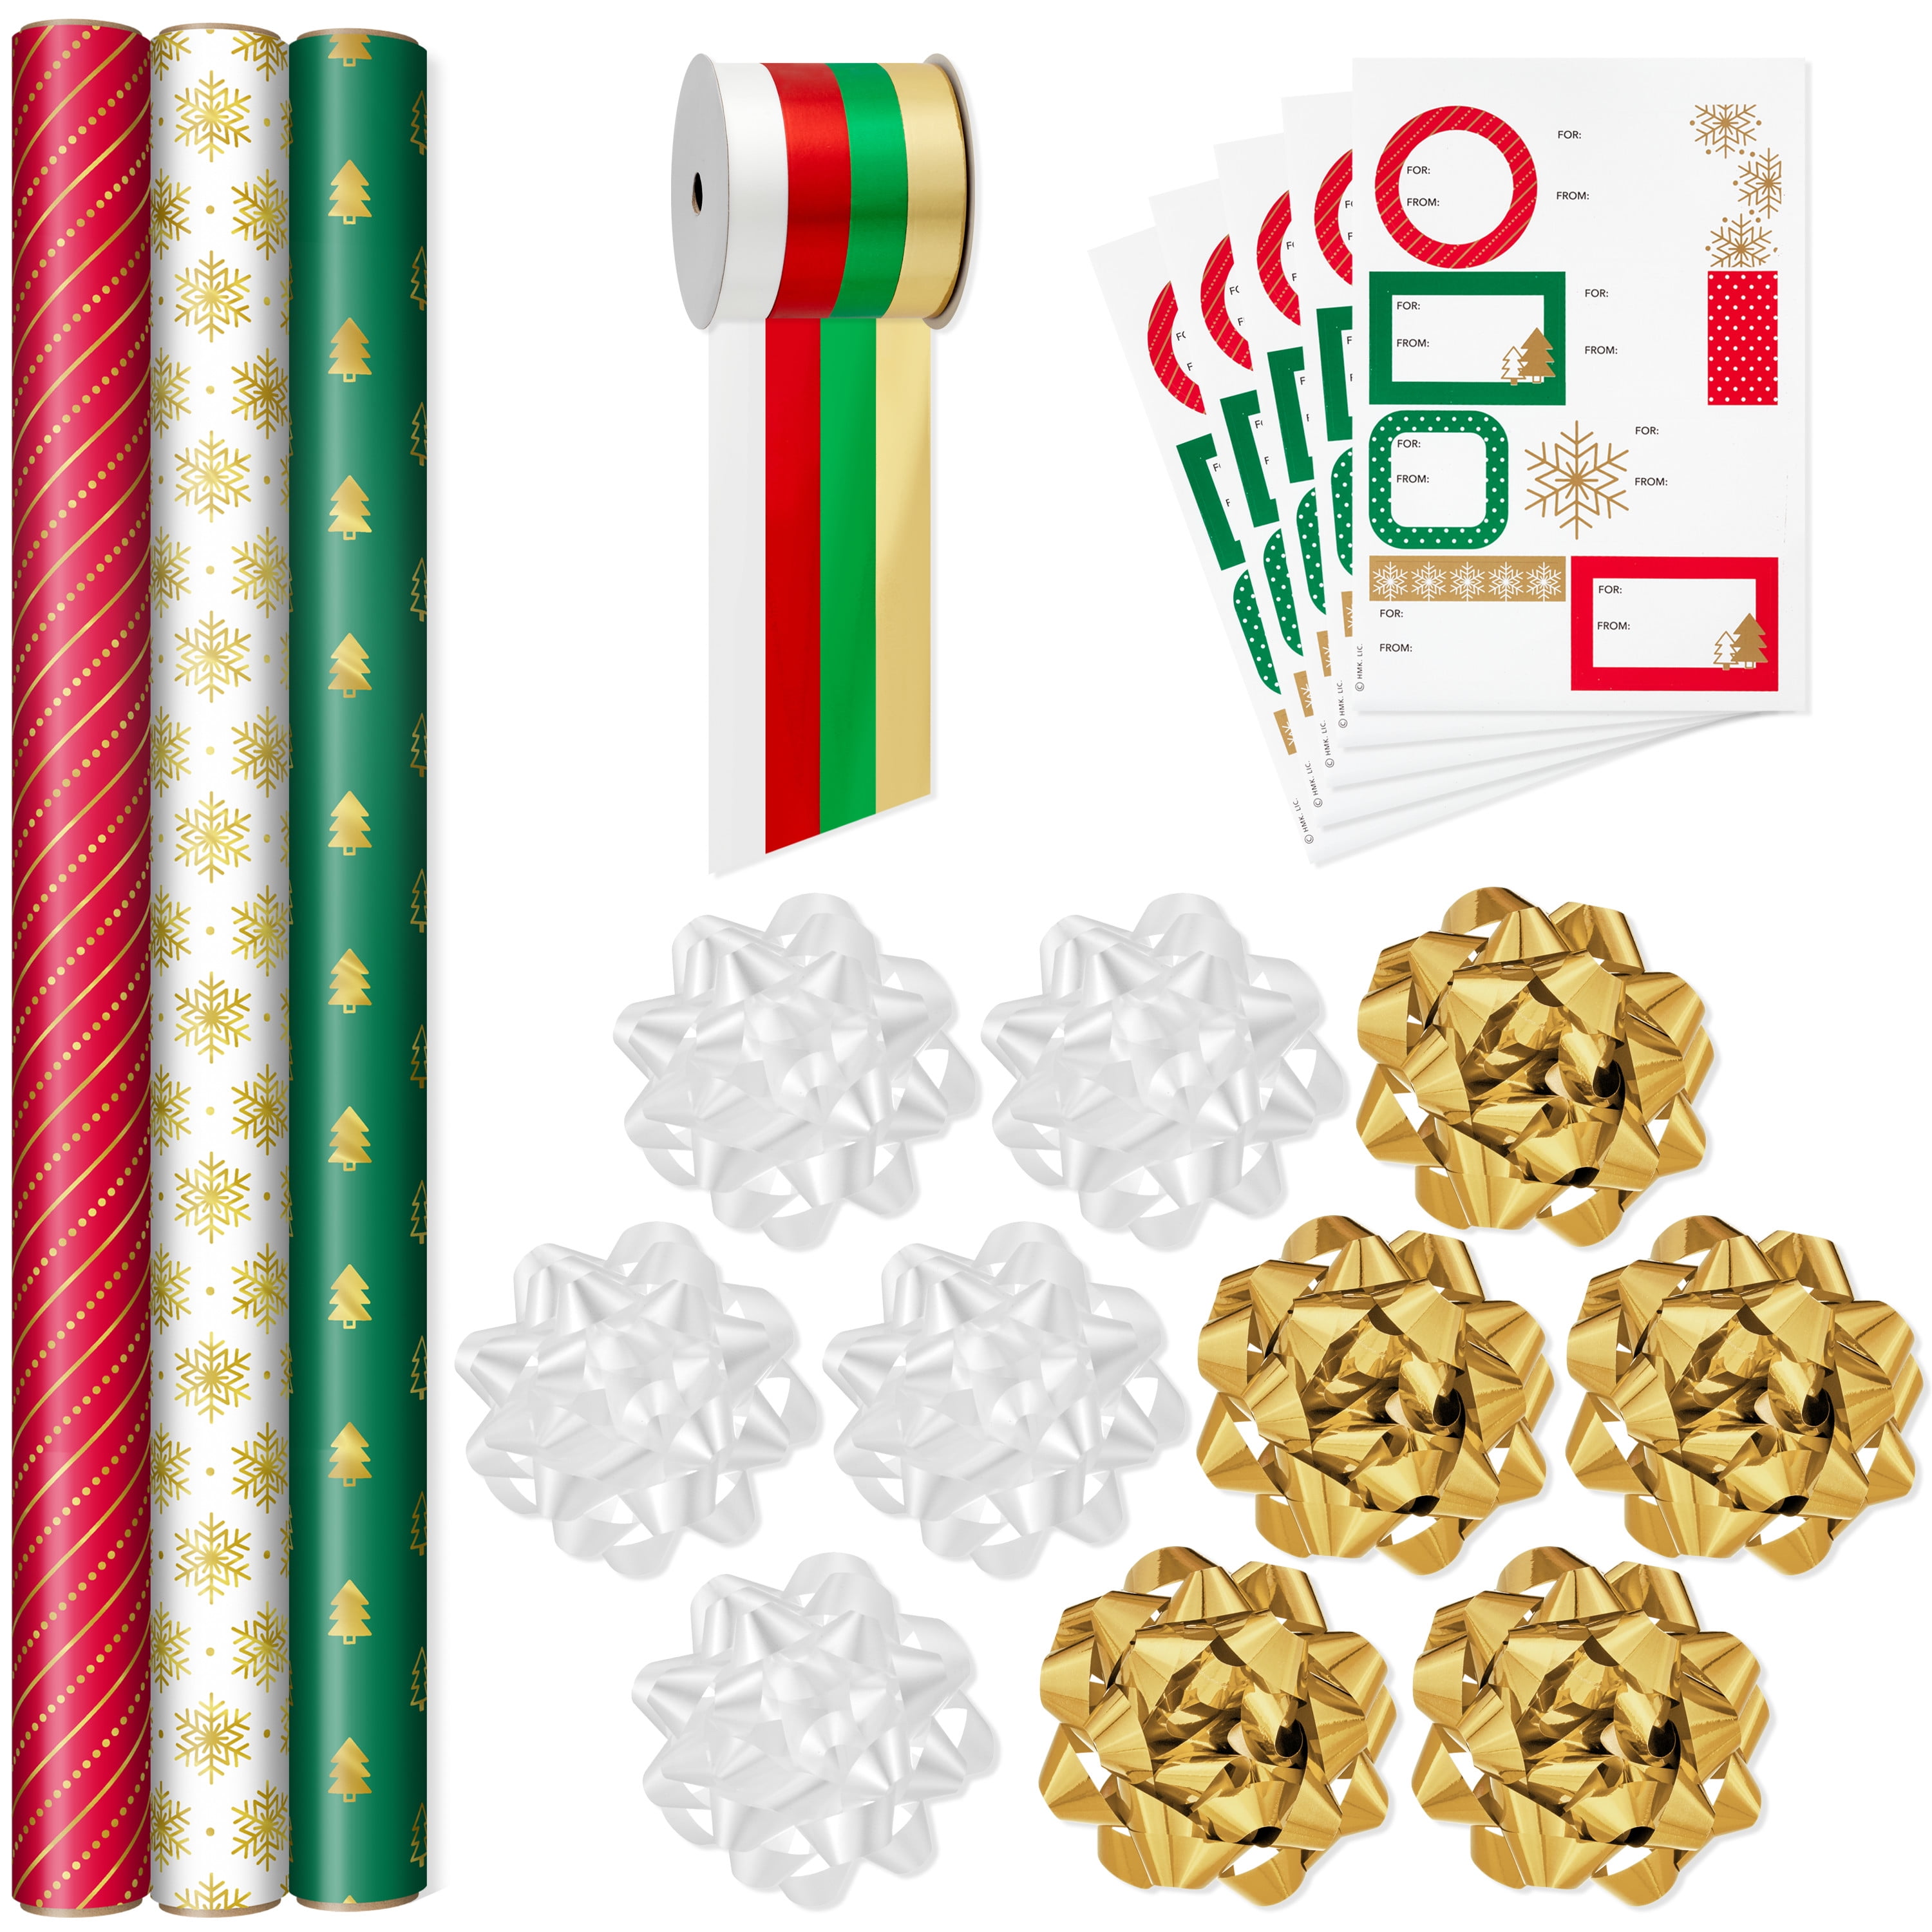 LSLJS Christmas Wrapping Paper Clearance, Christmas Gift Wrapping